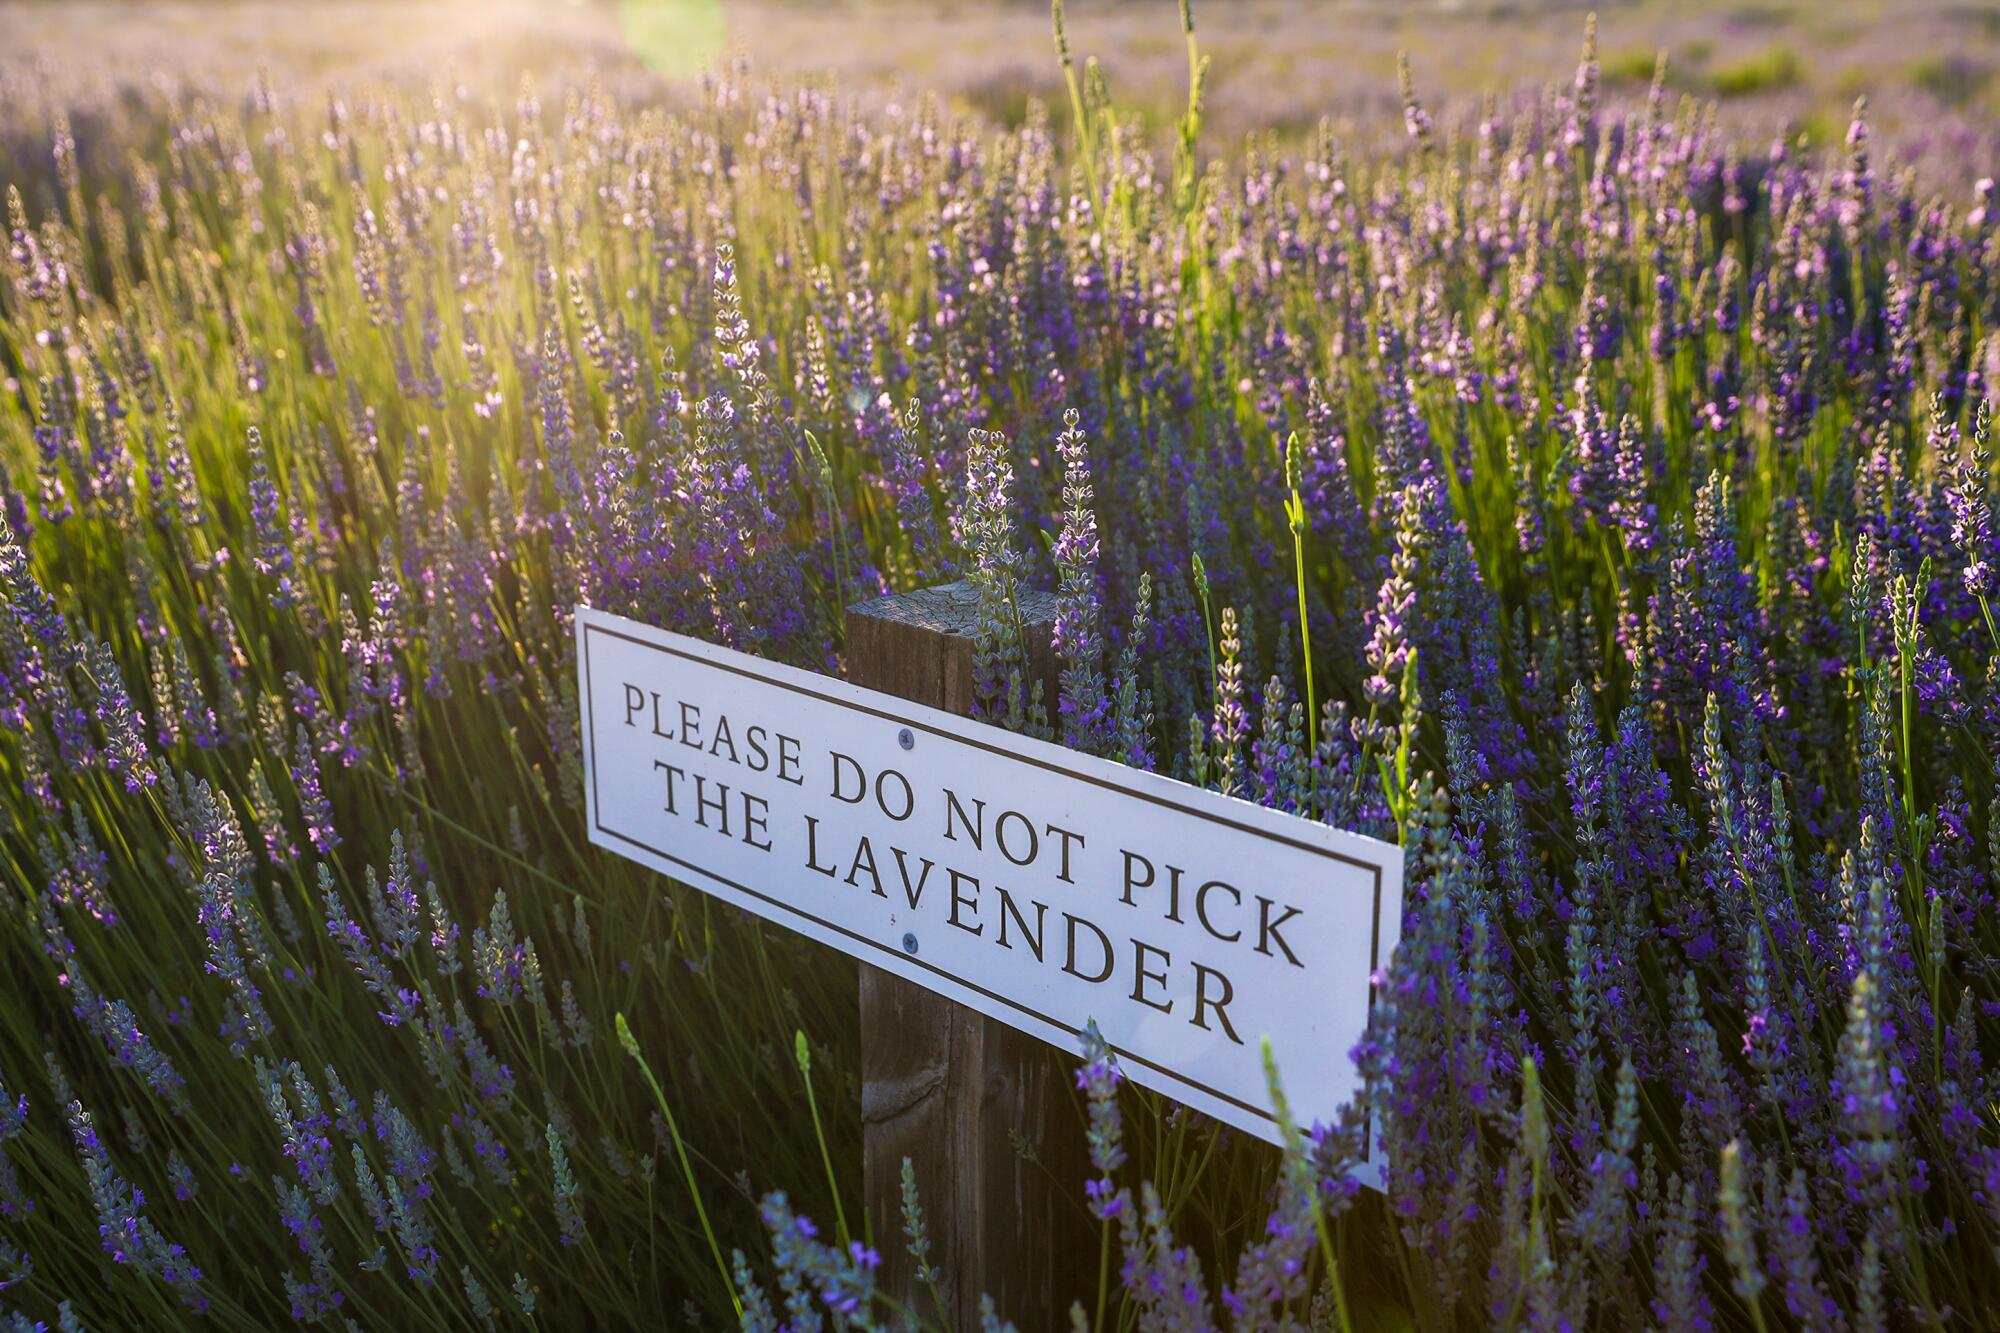 A sign reading "please do not pick the lavender" in a lavender field.